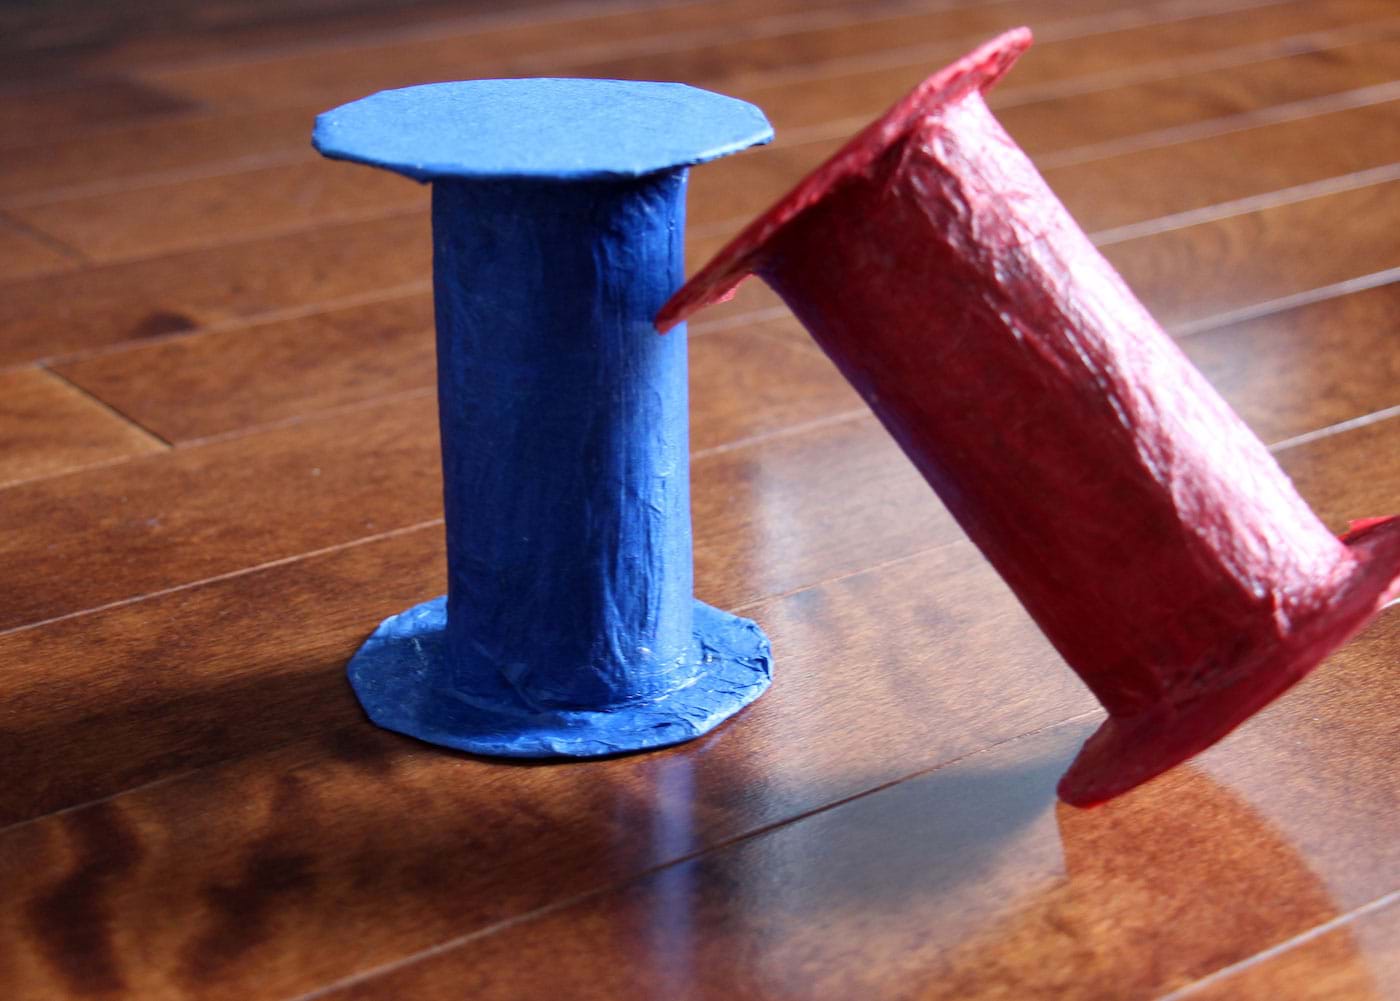 Toy building blocks made with toilet paper roll crafts